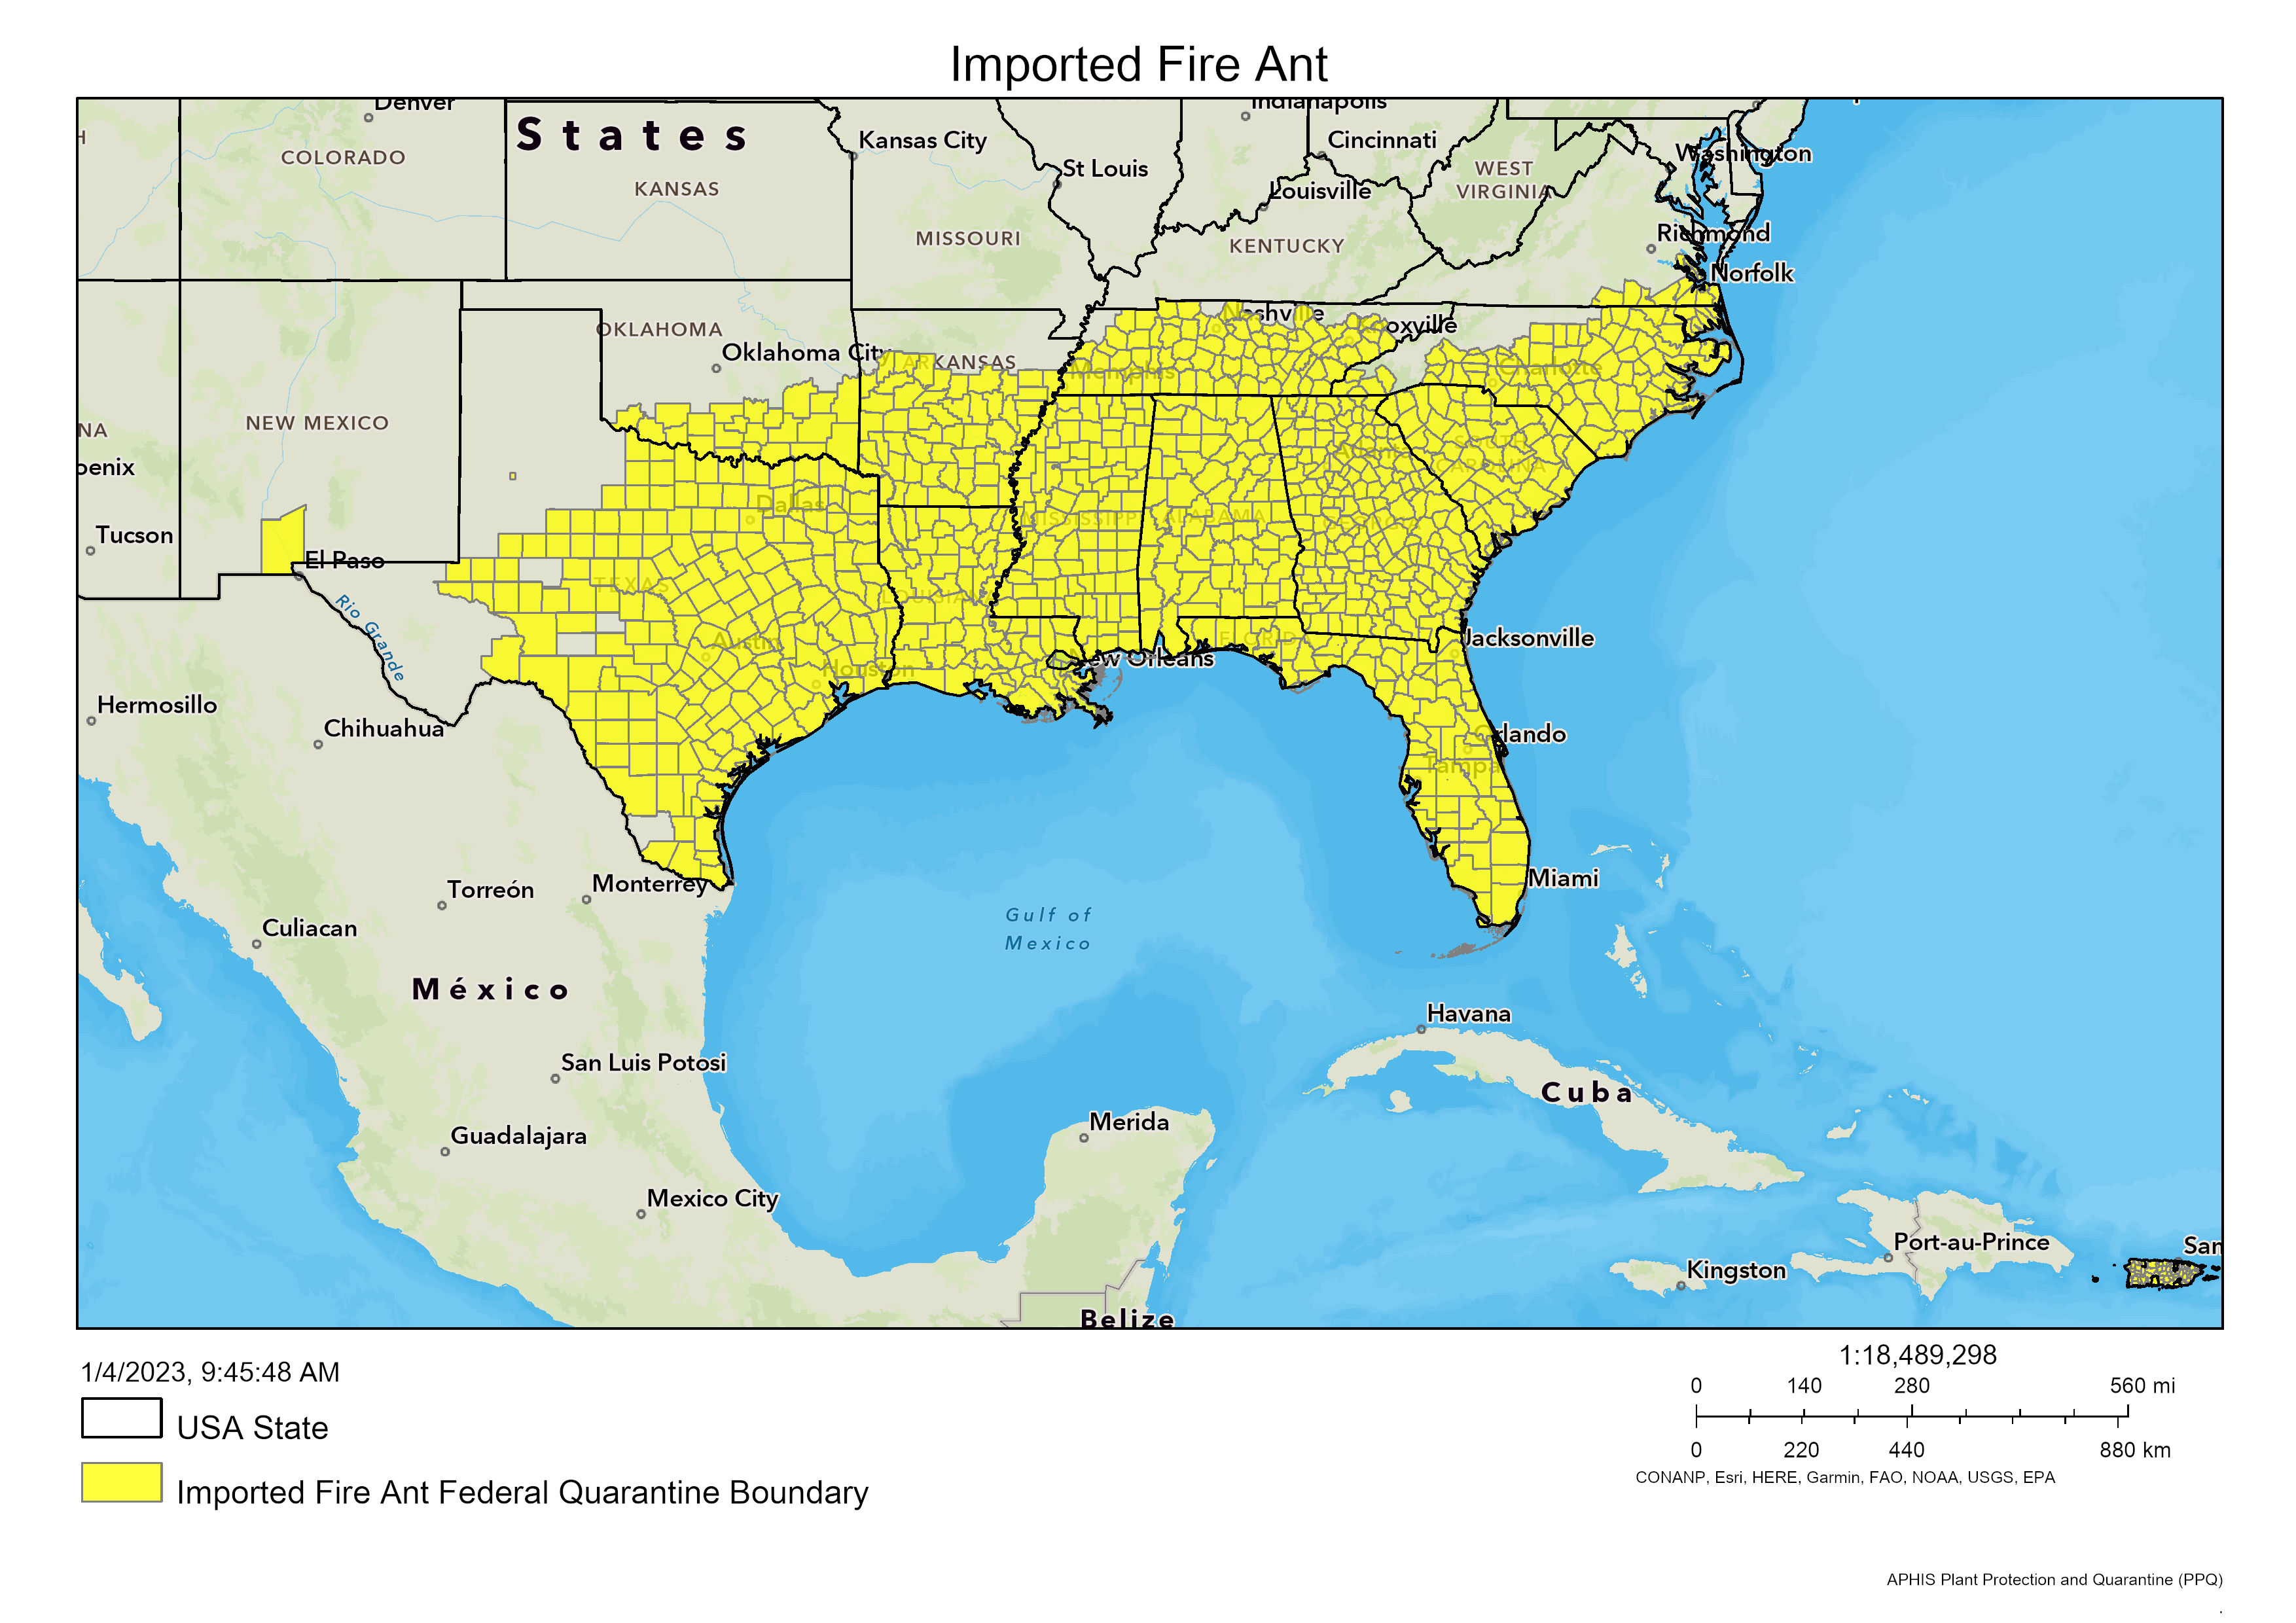 USDA Red Imported Fire Ant Zone. (Credit: USDA)